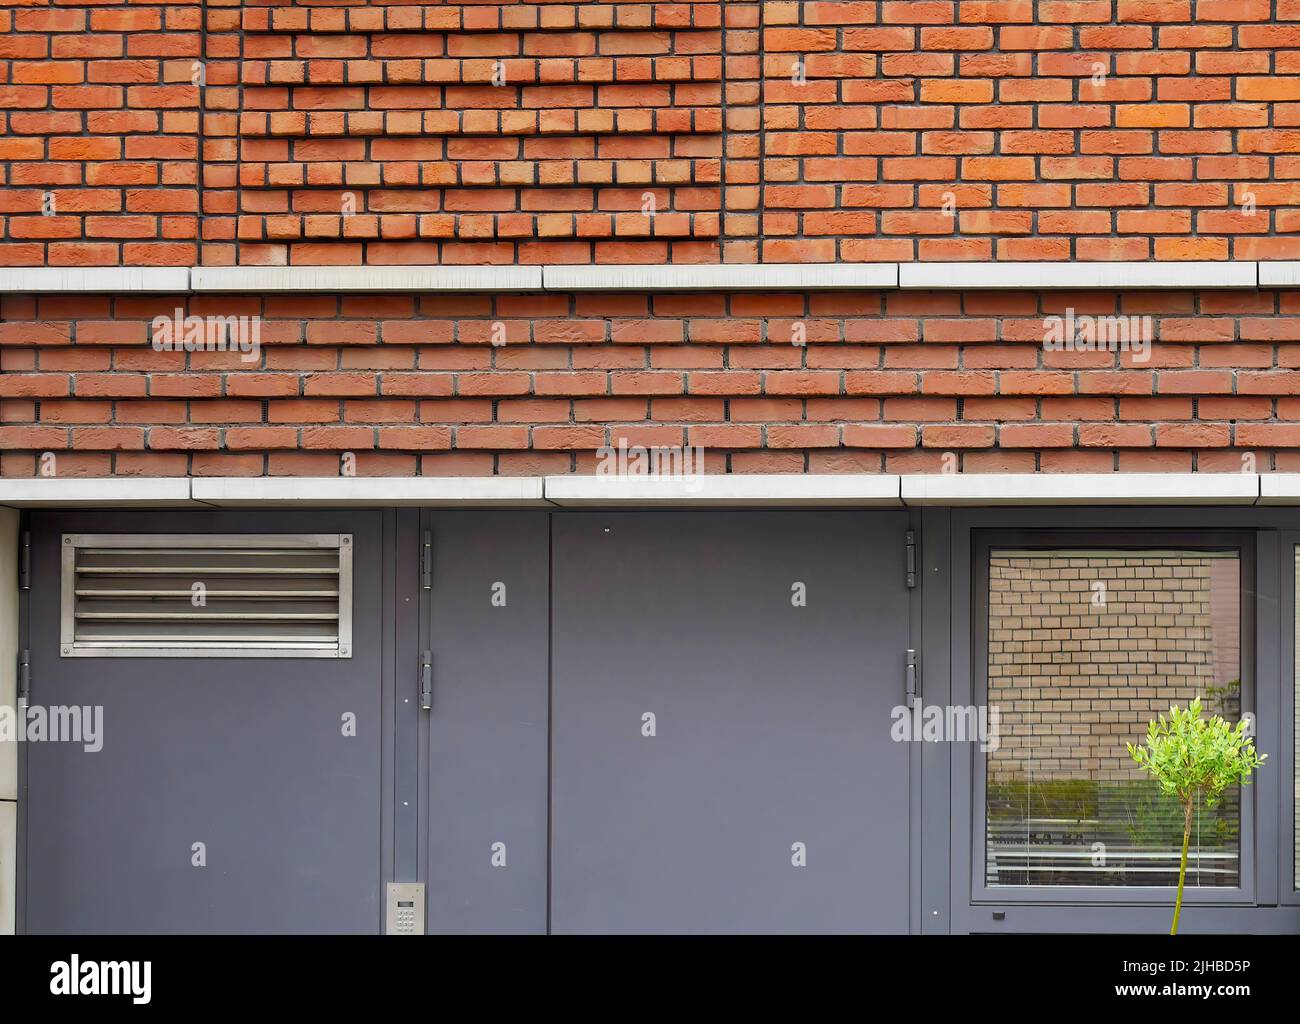 Geometric shape elevation of exterior brick wall pattern with metal door modern design building Stock Photo